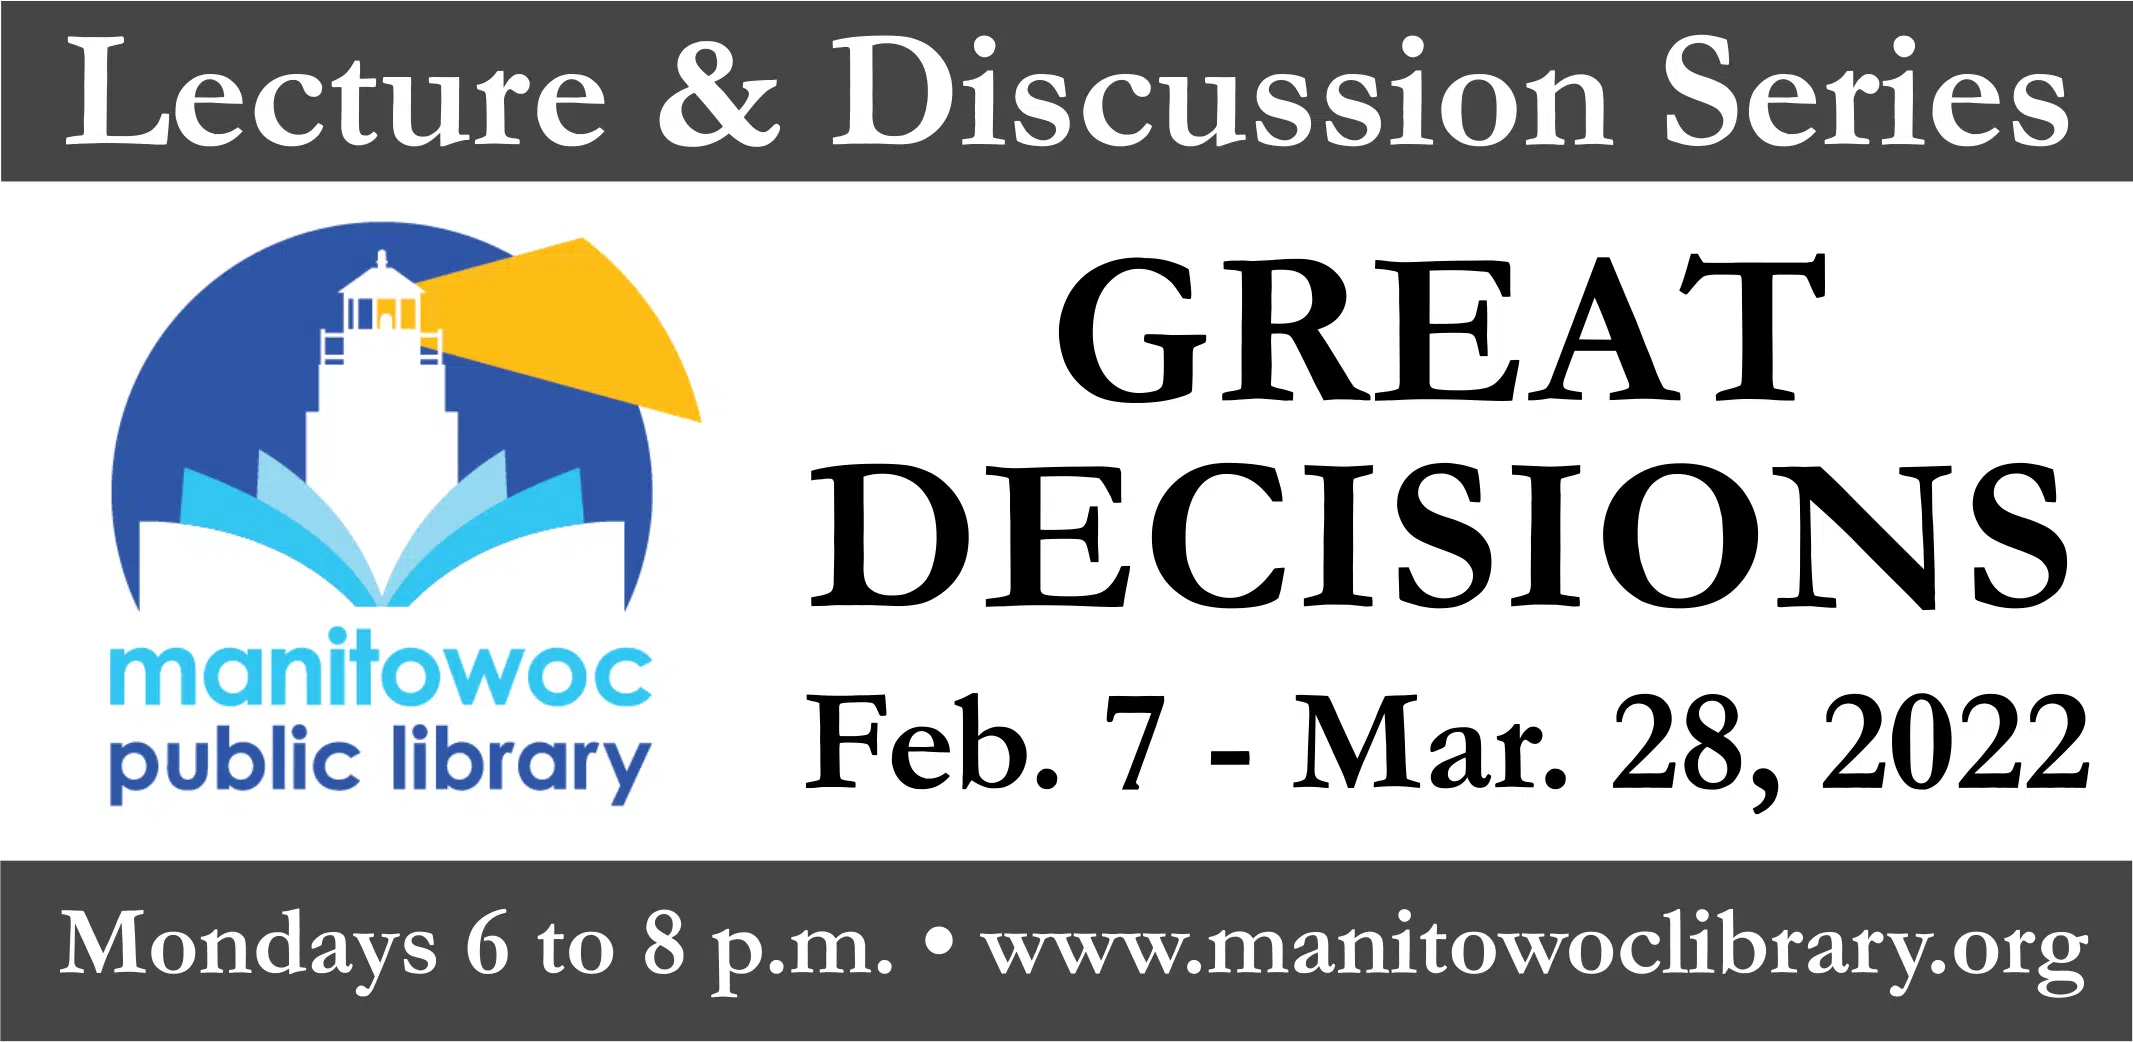 Manitowoc Public Library Looks to Help the Public Make "Great Decisions" in 2022